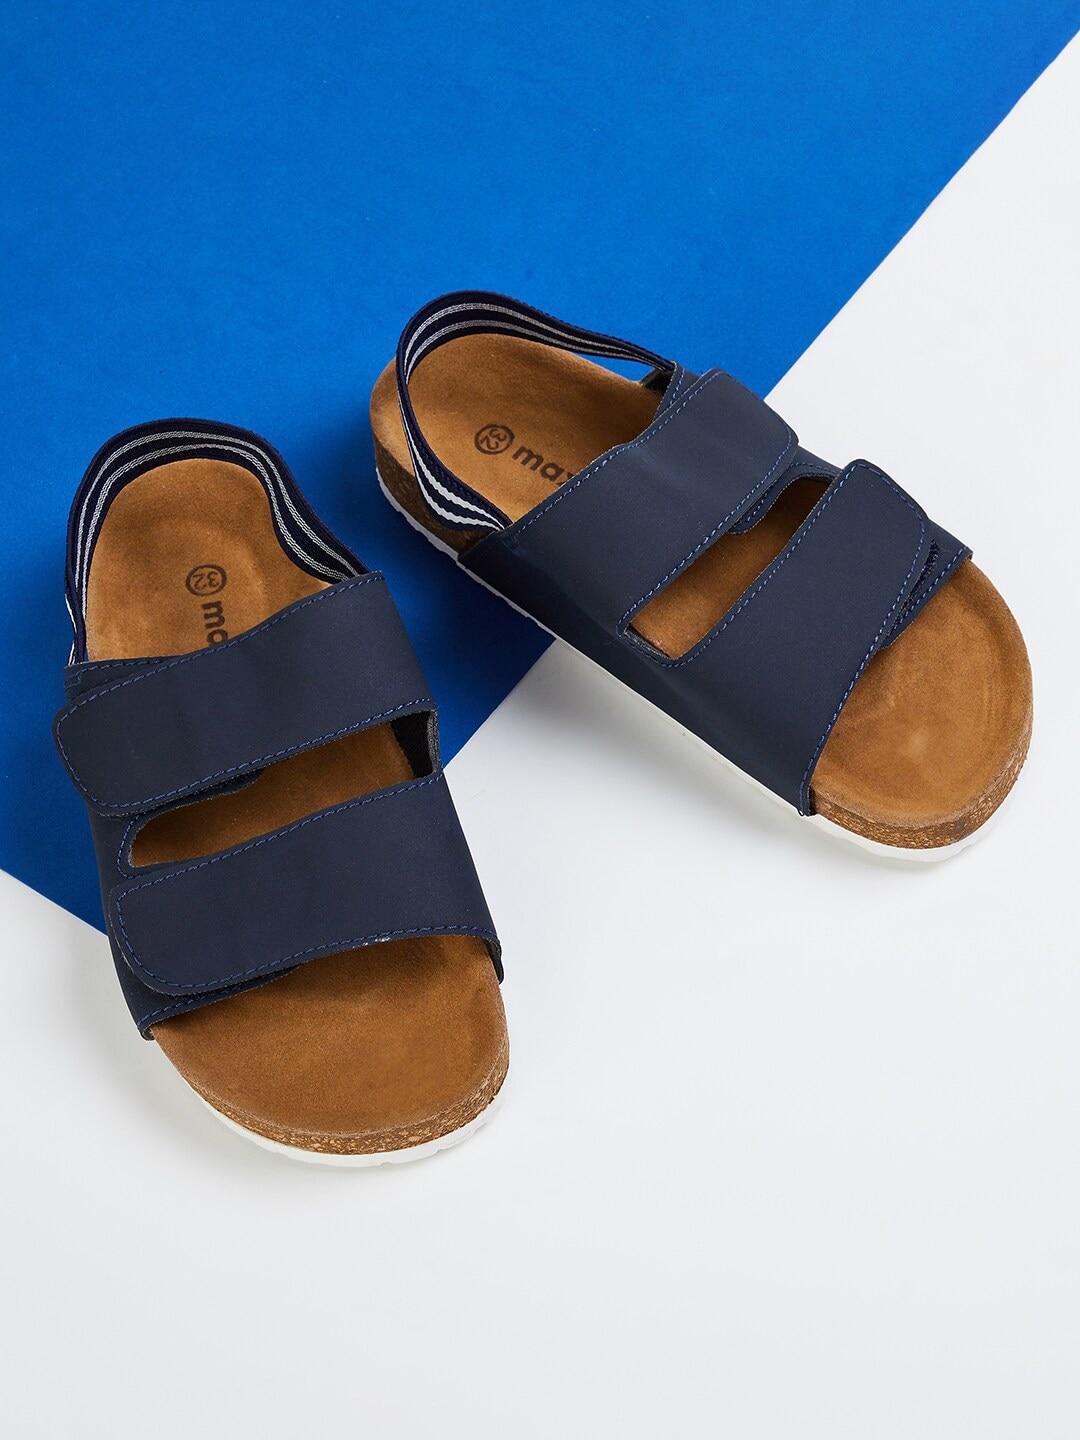 max Boys Comfort Sandals With Backstrap